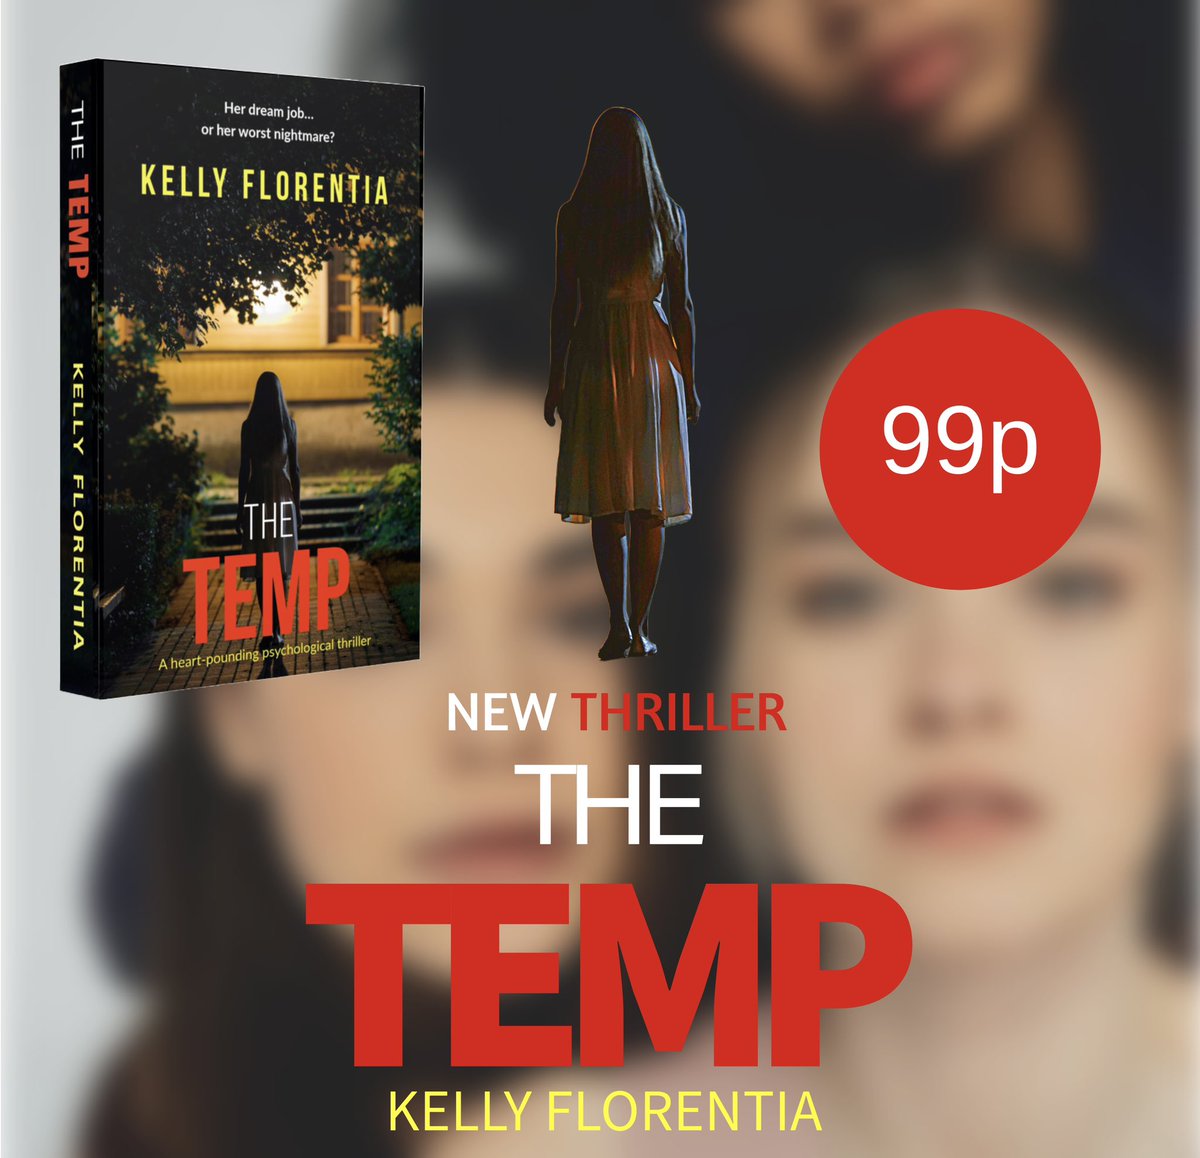 ✨99p NEW THRILLER✨ One night Two sisters One obsession One fatal attraction THE TEMP amzn.to/3JP7Wk9 A heart-pounding #PsychologicalThriller #thursdayvibes #tbr #bookchallenge #thrillerbooks